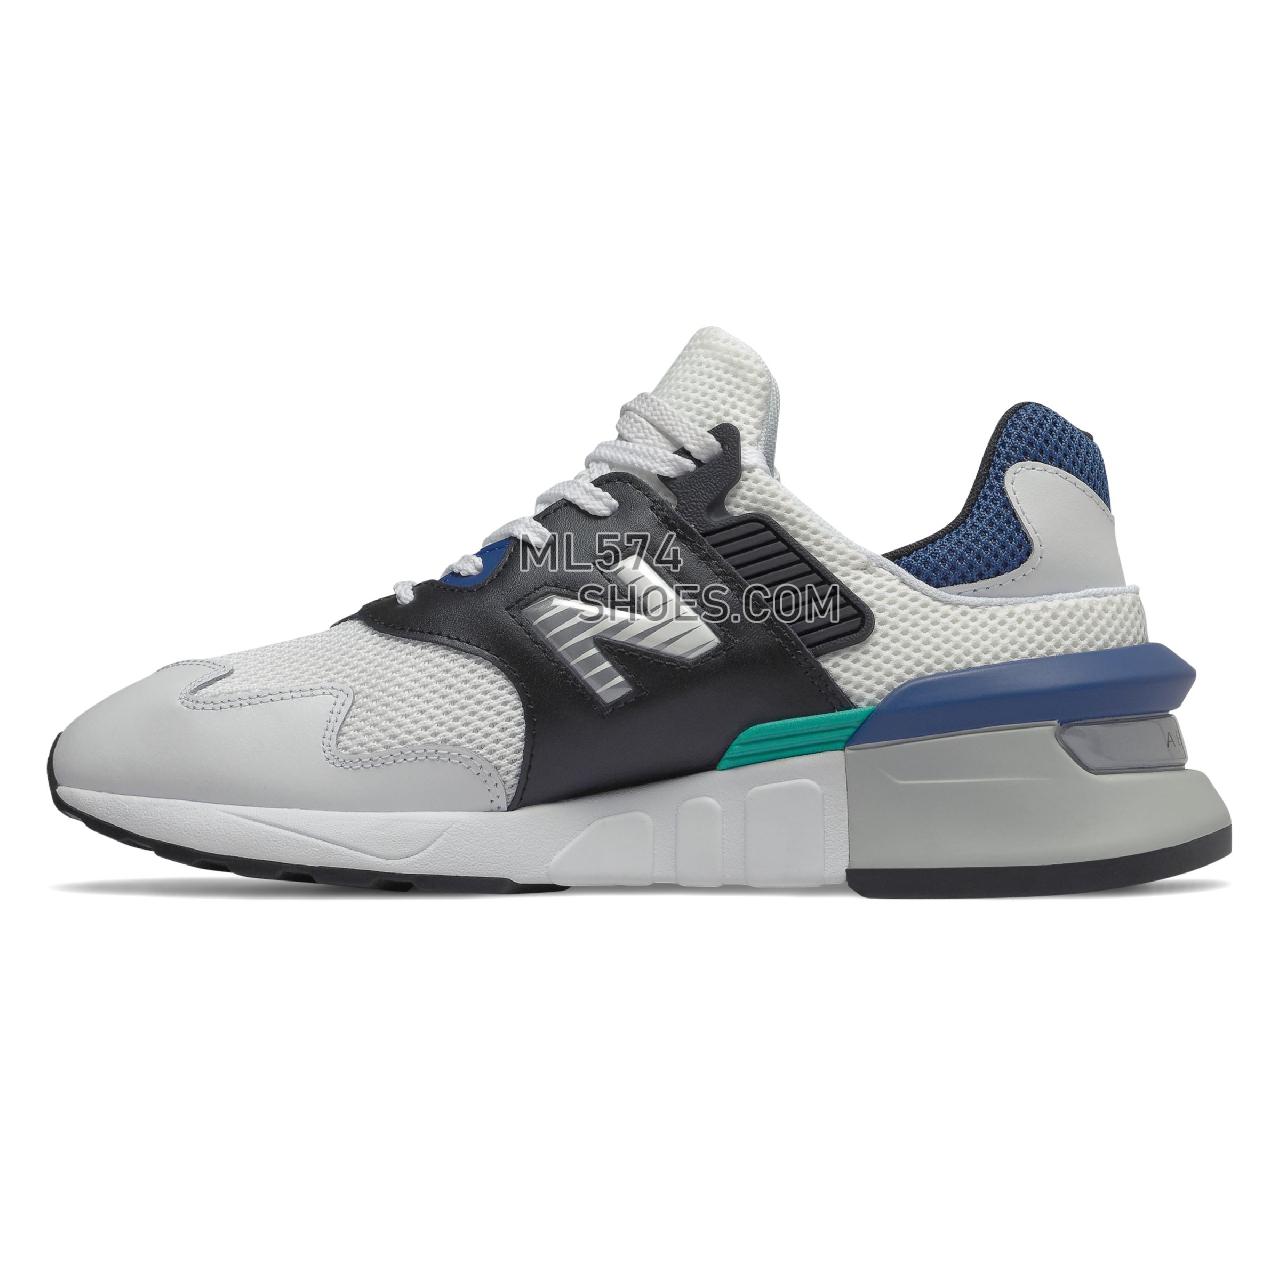 New Balance 997 Sport - Men's Sport Style Sneakers - White with Moroccan Tile - MS997JCD